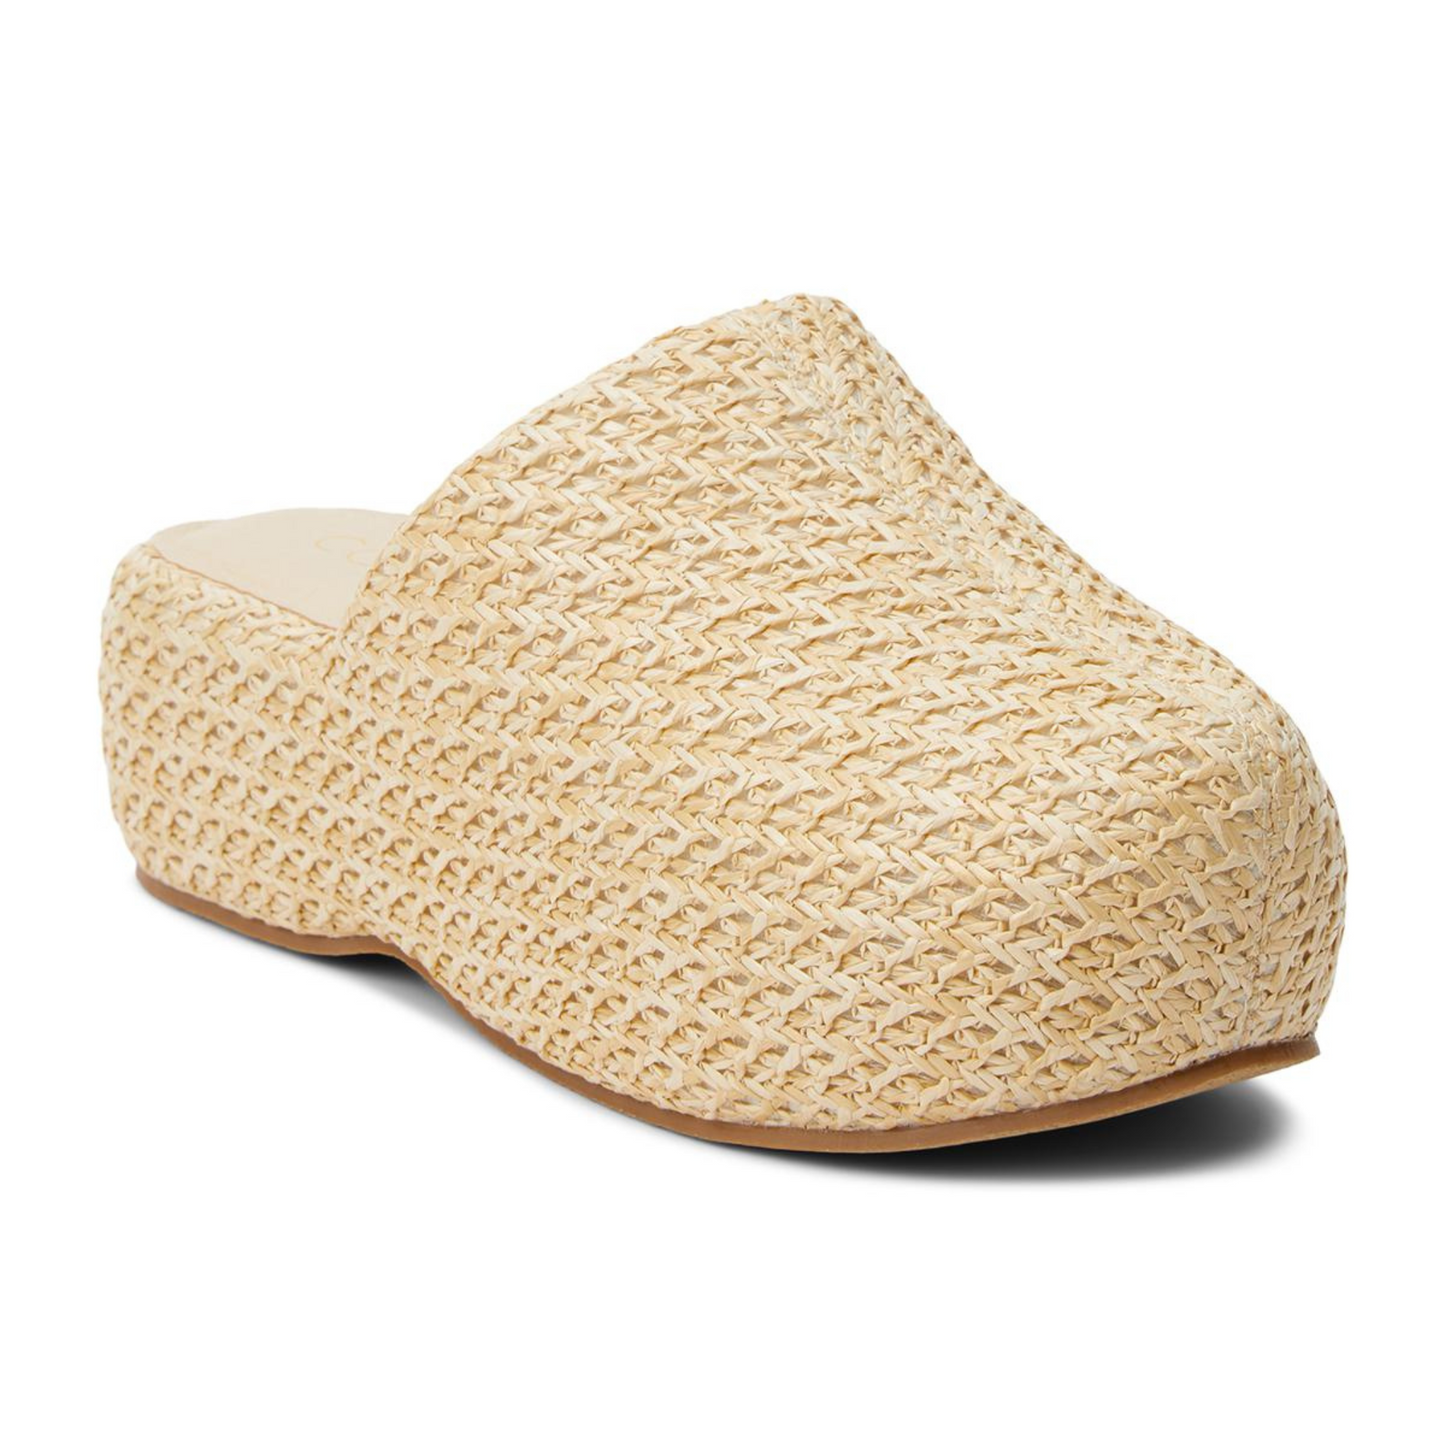 Bella is a comfortable, lightweight wedge shoe made from woven fabric. Wear Bella all day without the discomfort that comes from traditional wedges, thanks to its unique design and materials.